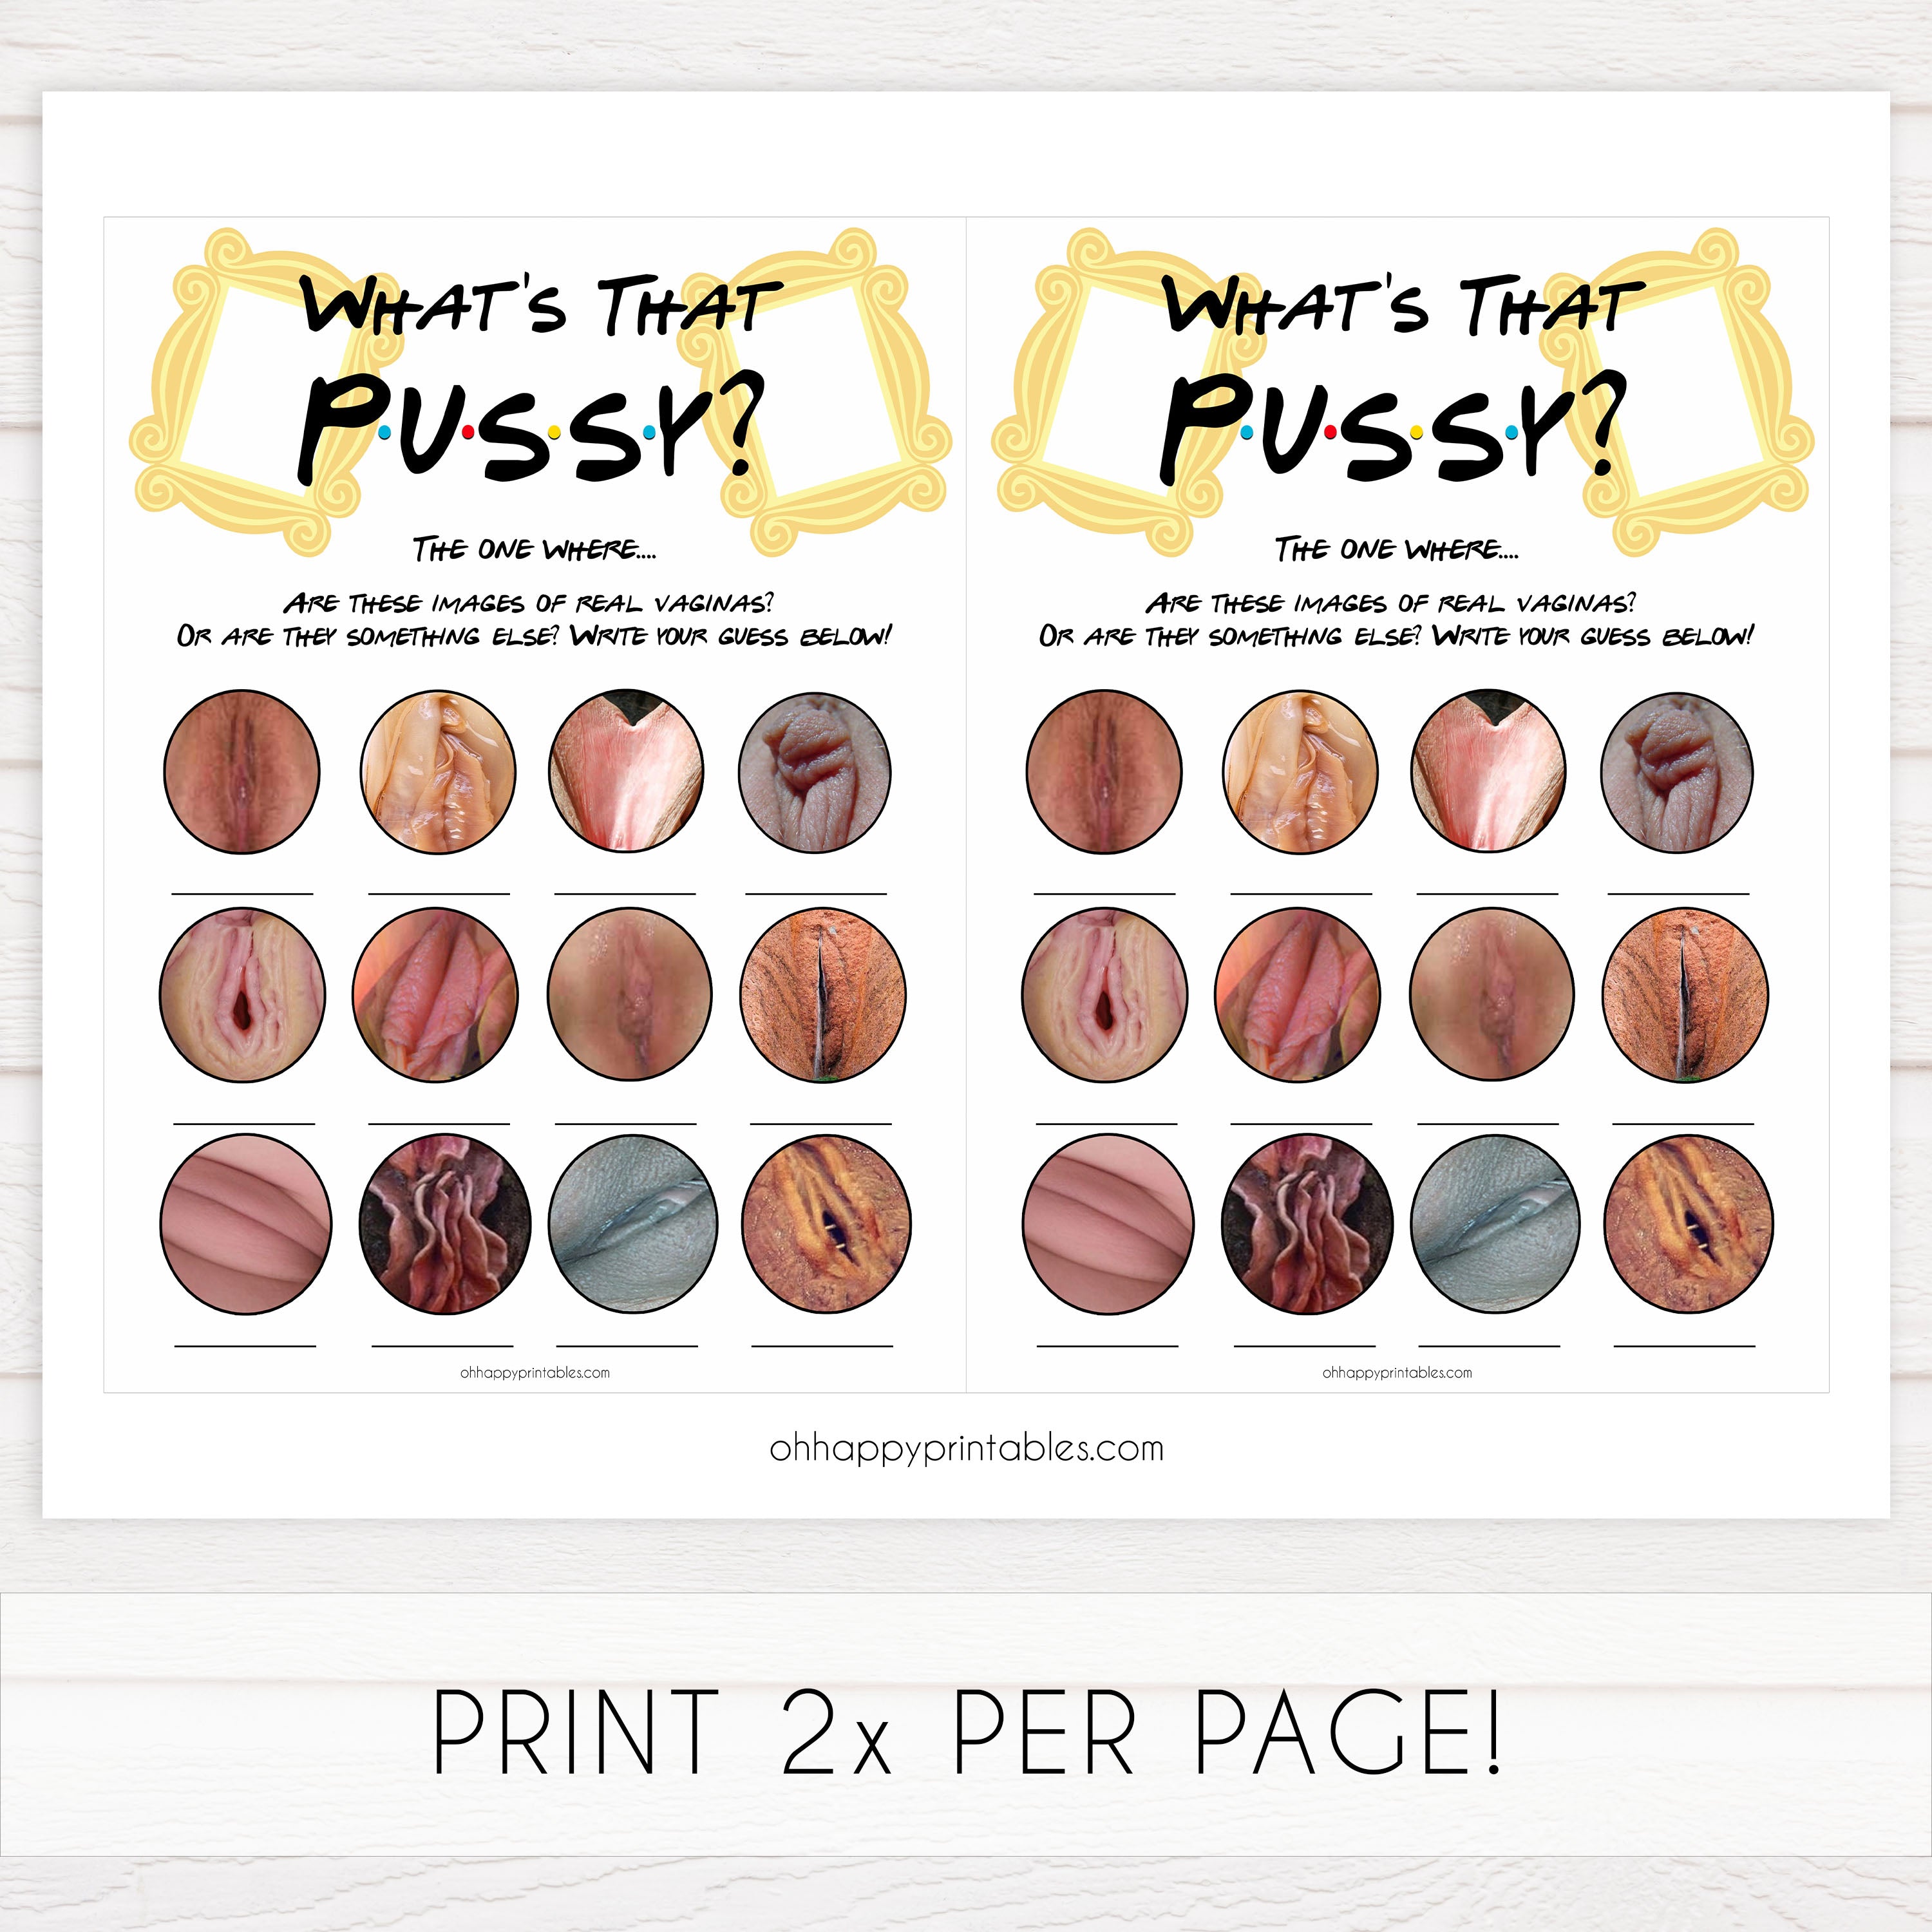 whats that pussy game, guess the vagina game, Printable bachelorette games, friends bachelorette, friends hen party games, fun hen party games, bachelorette game ideas, friends adult party games, naughty hen games, naughty bachelorette games